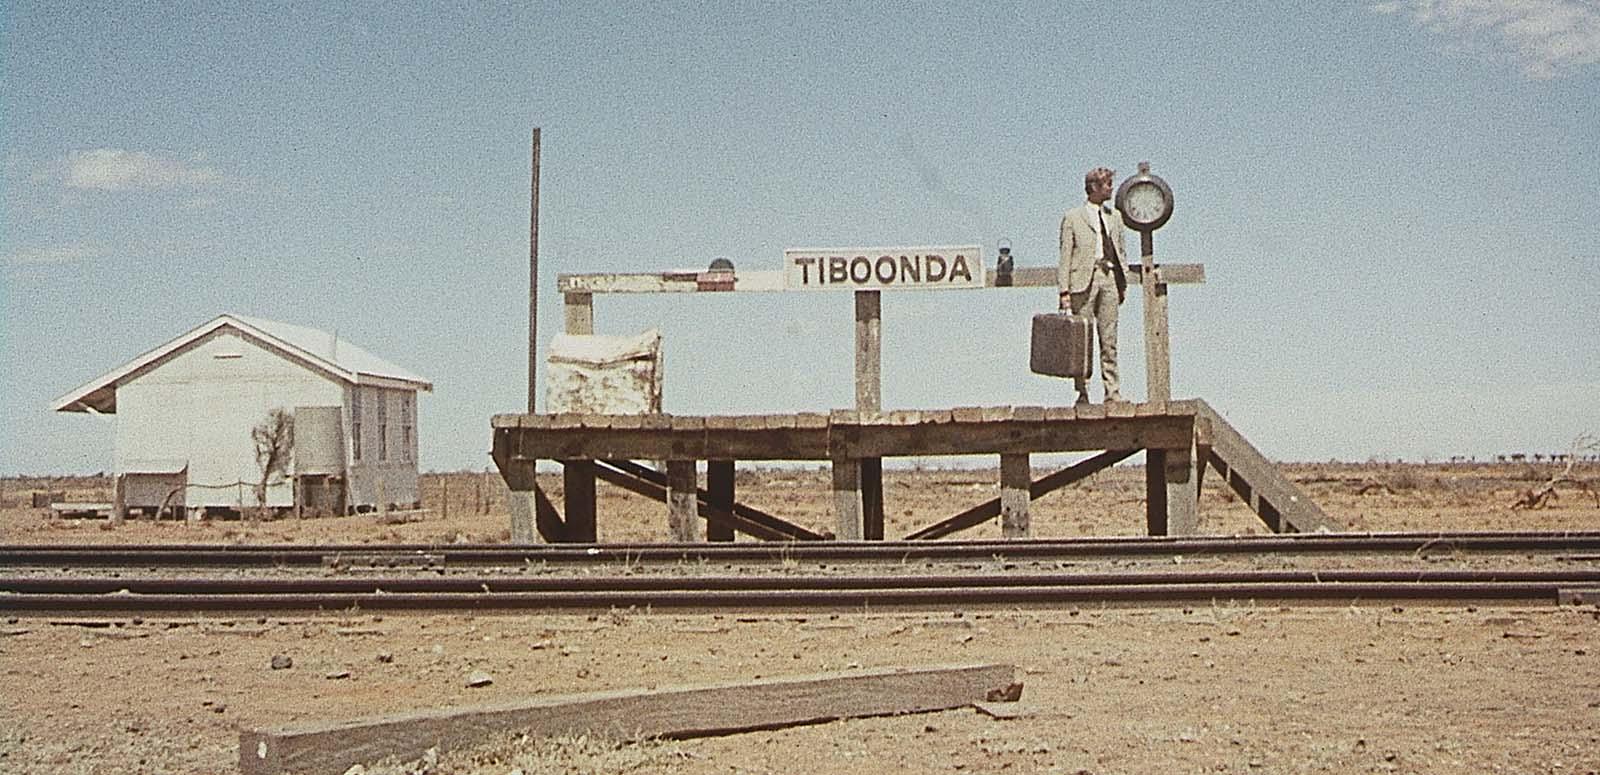 John Grant waits alone on an outback railway station platform in a still from the 1971 film Wake in Fright